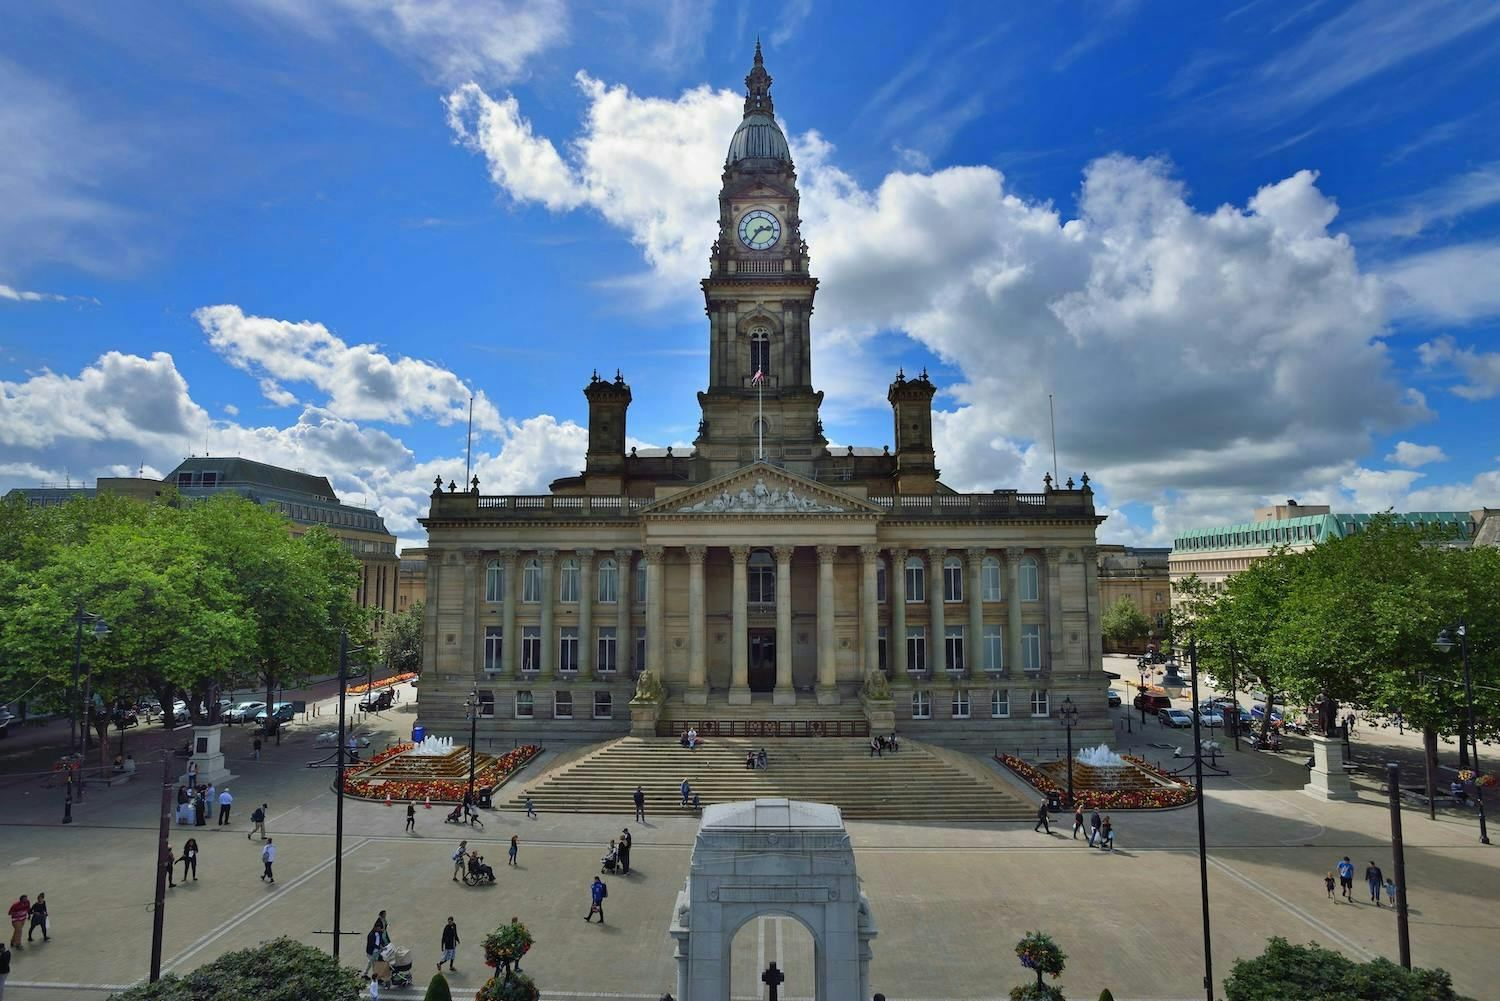 Image of Bolton town hall on a sunny day